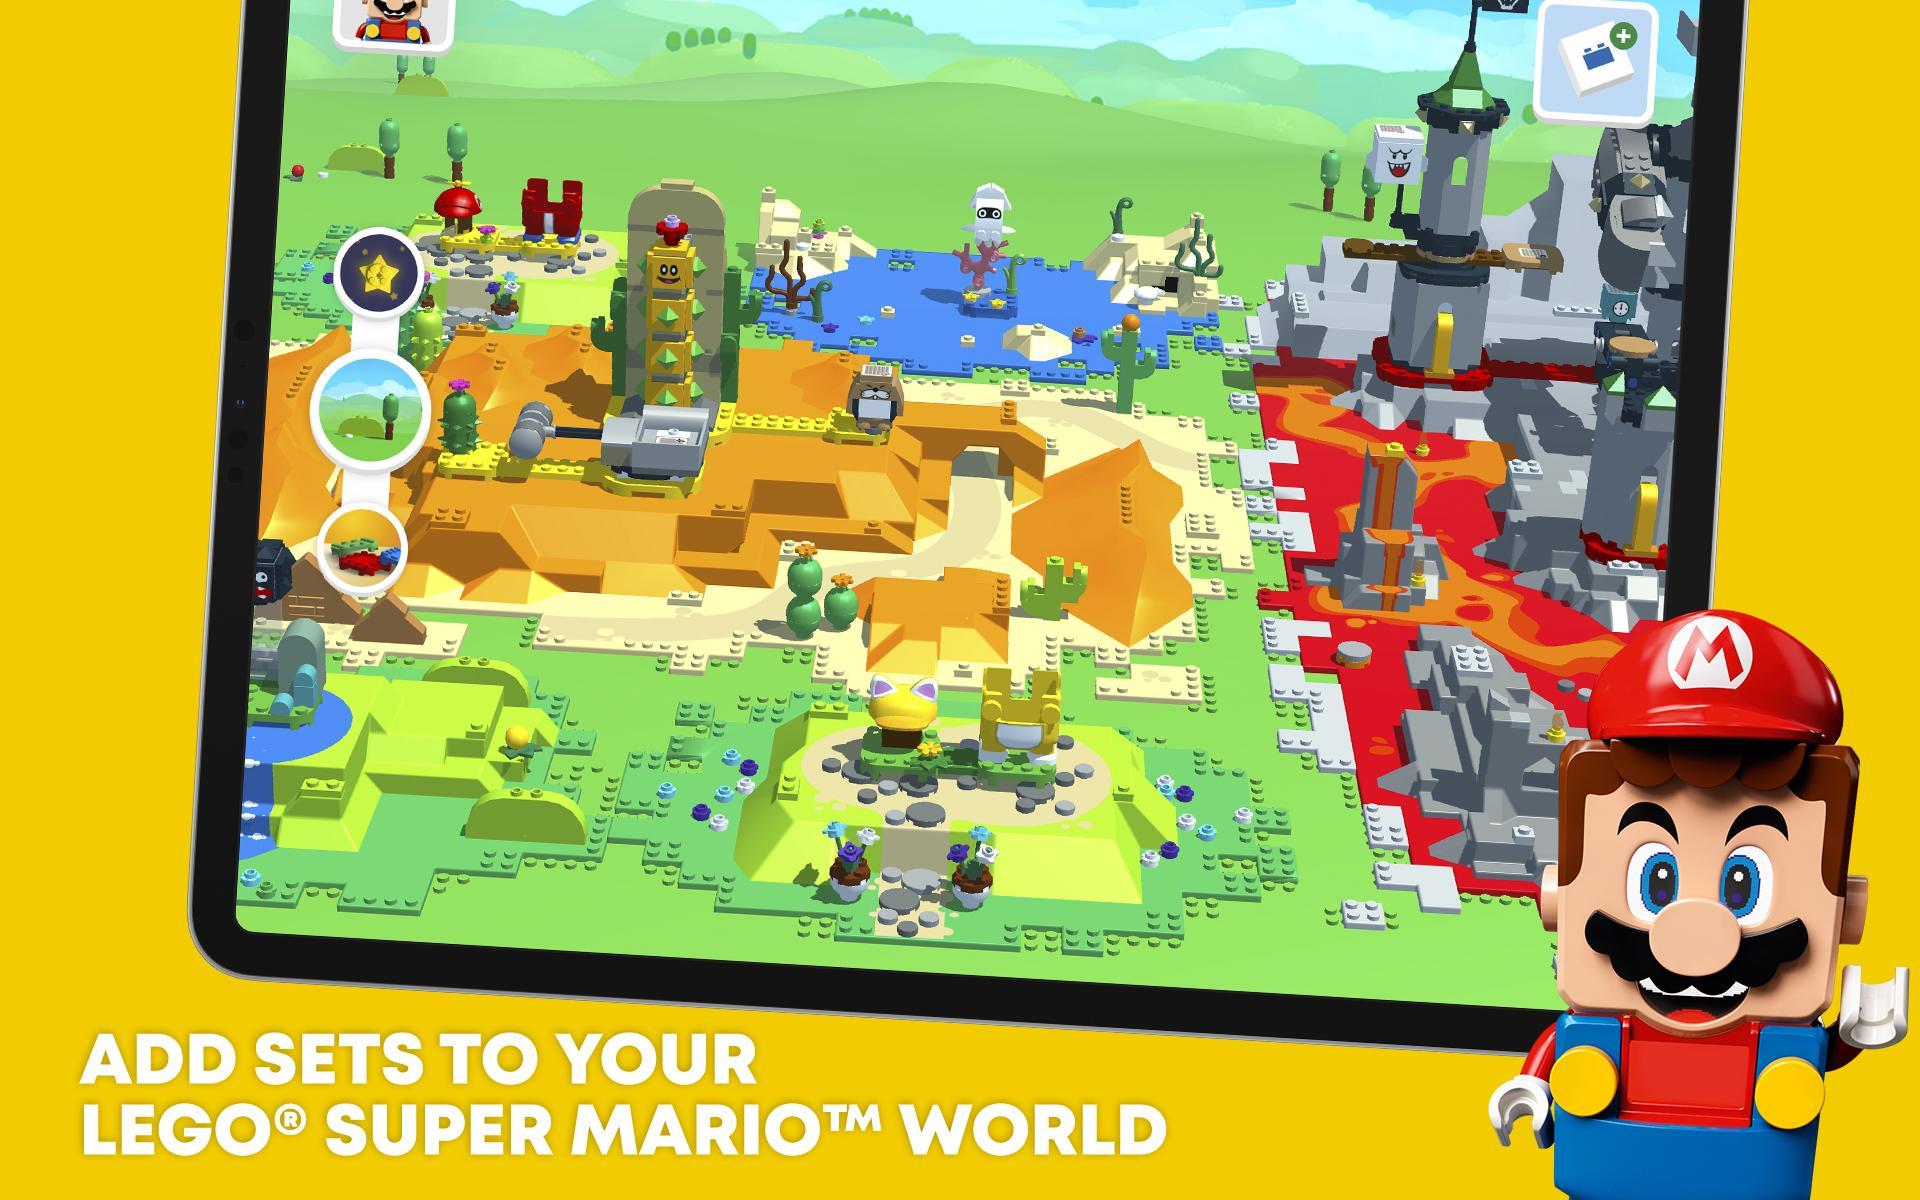 Lego Super Mario For Android Apk Download - roblox world of mario 10 apk download android arcade games